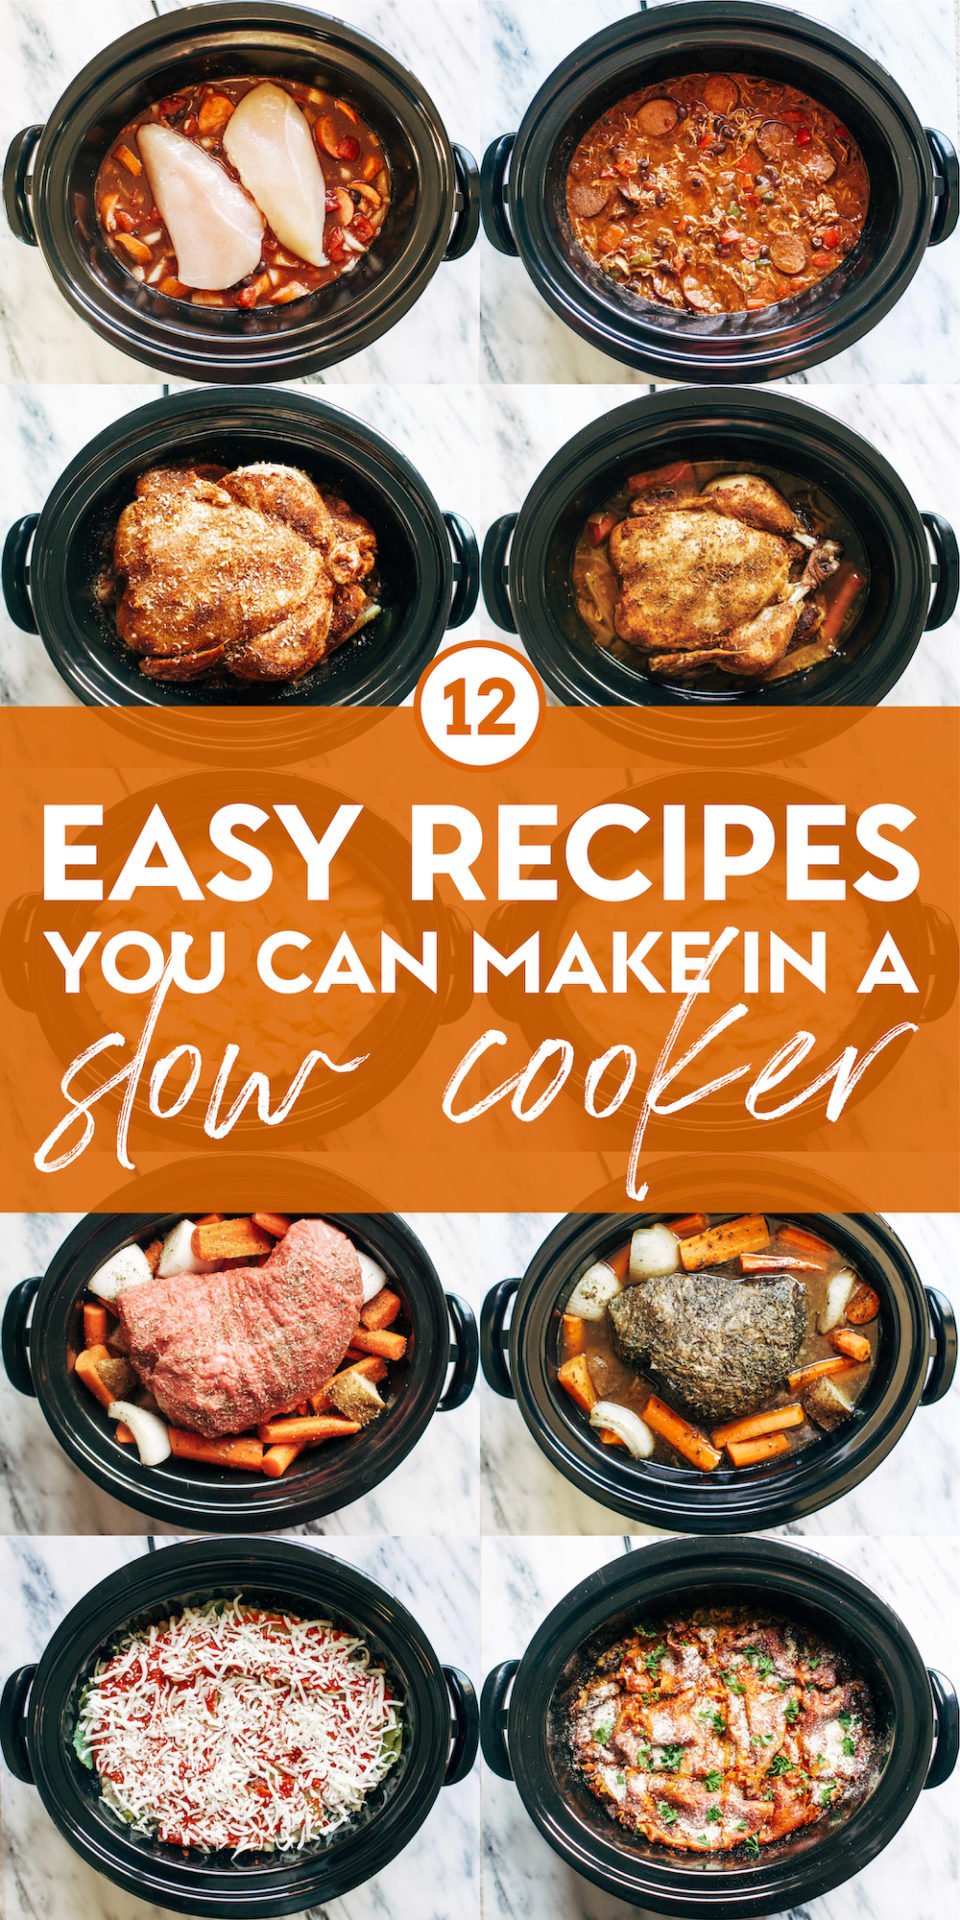 Slow Cooker Recipes for the Busy Family - The Magical Slow Cooker